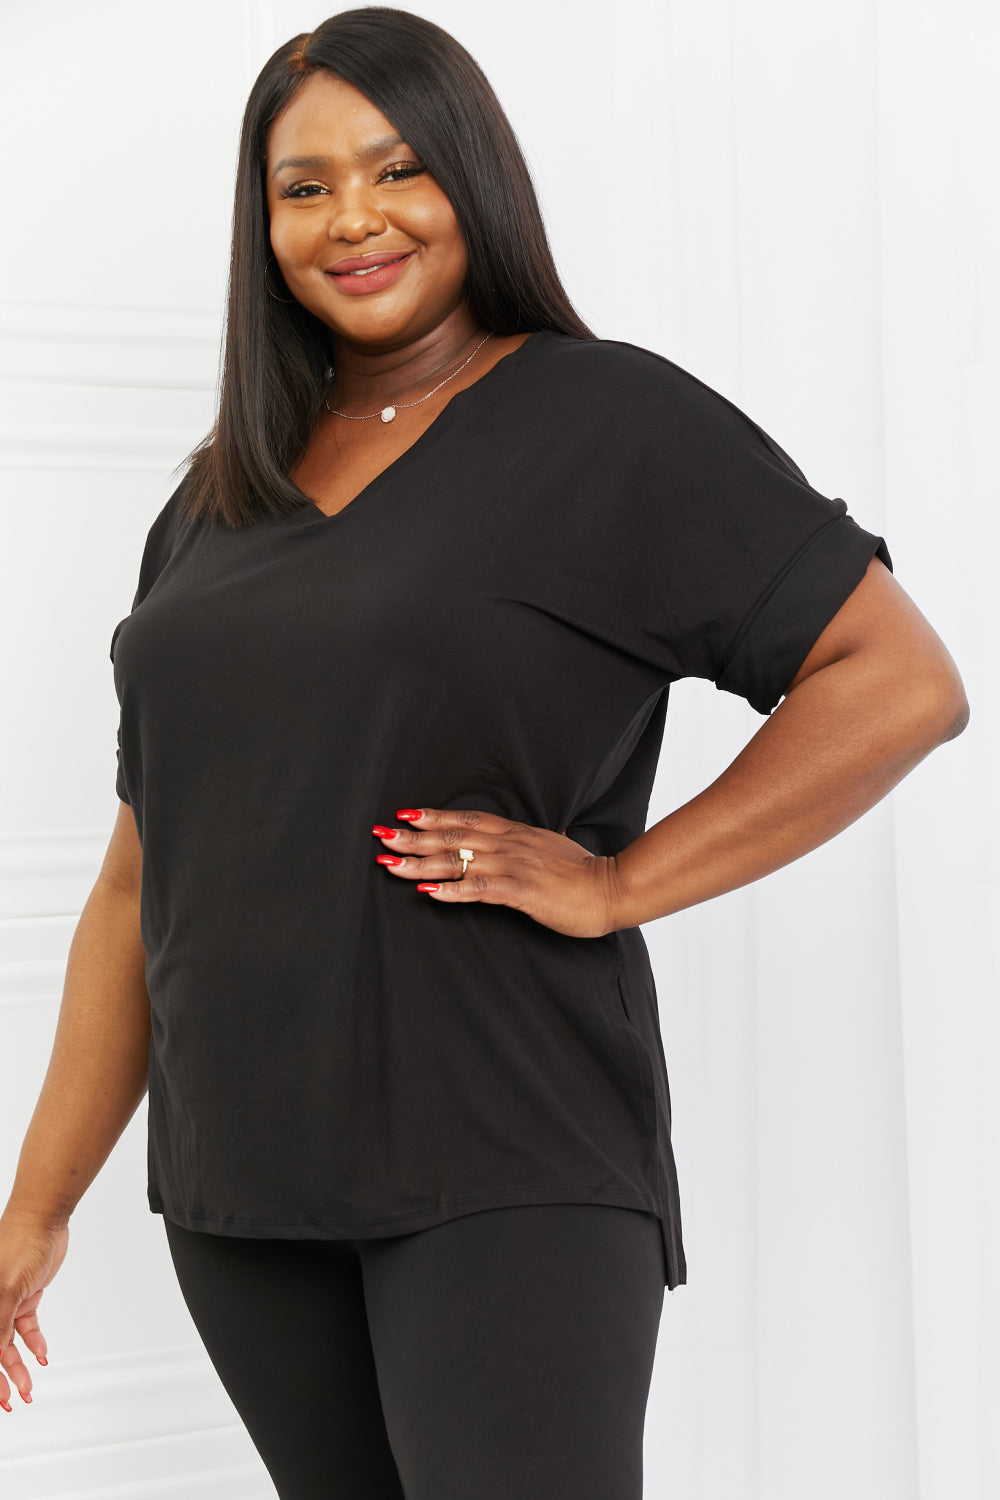 Zenana Self Love Full Size Brushed DTY Microfiber Lounge Set in Black-Loungewear-Inspired by Justeen-Women's Clothing Boutique in Chicago, Illinois